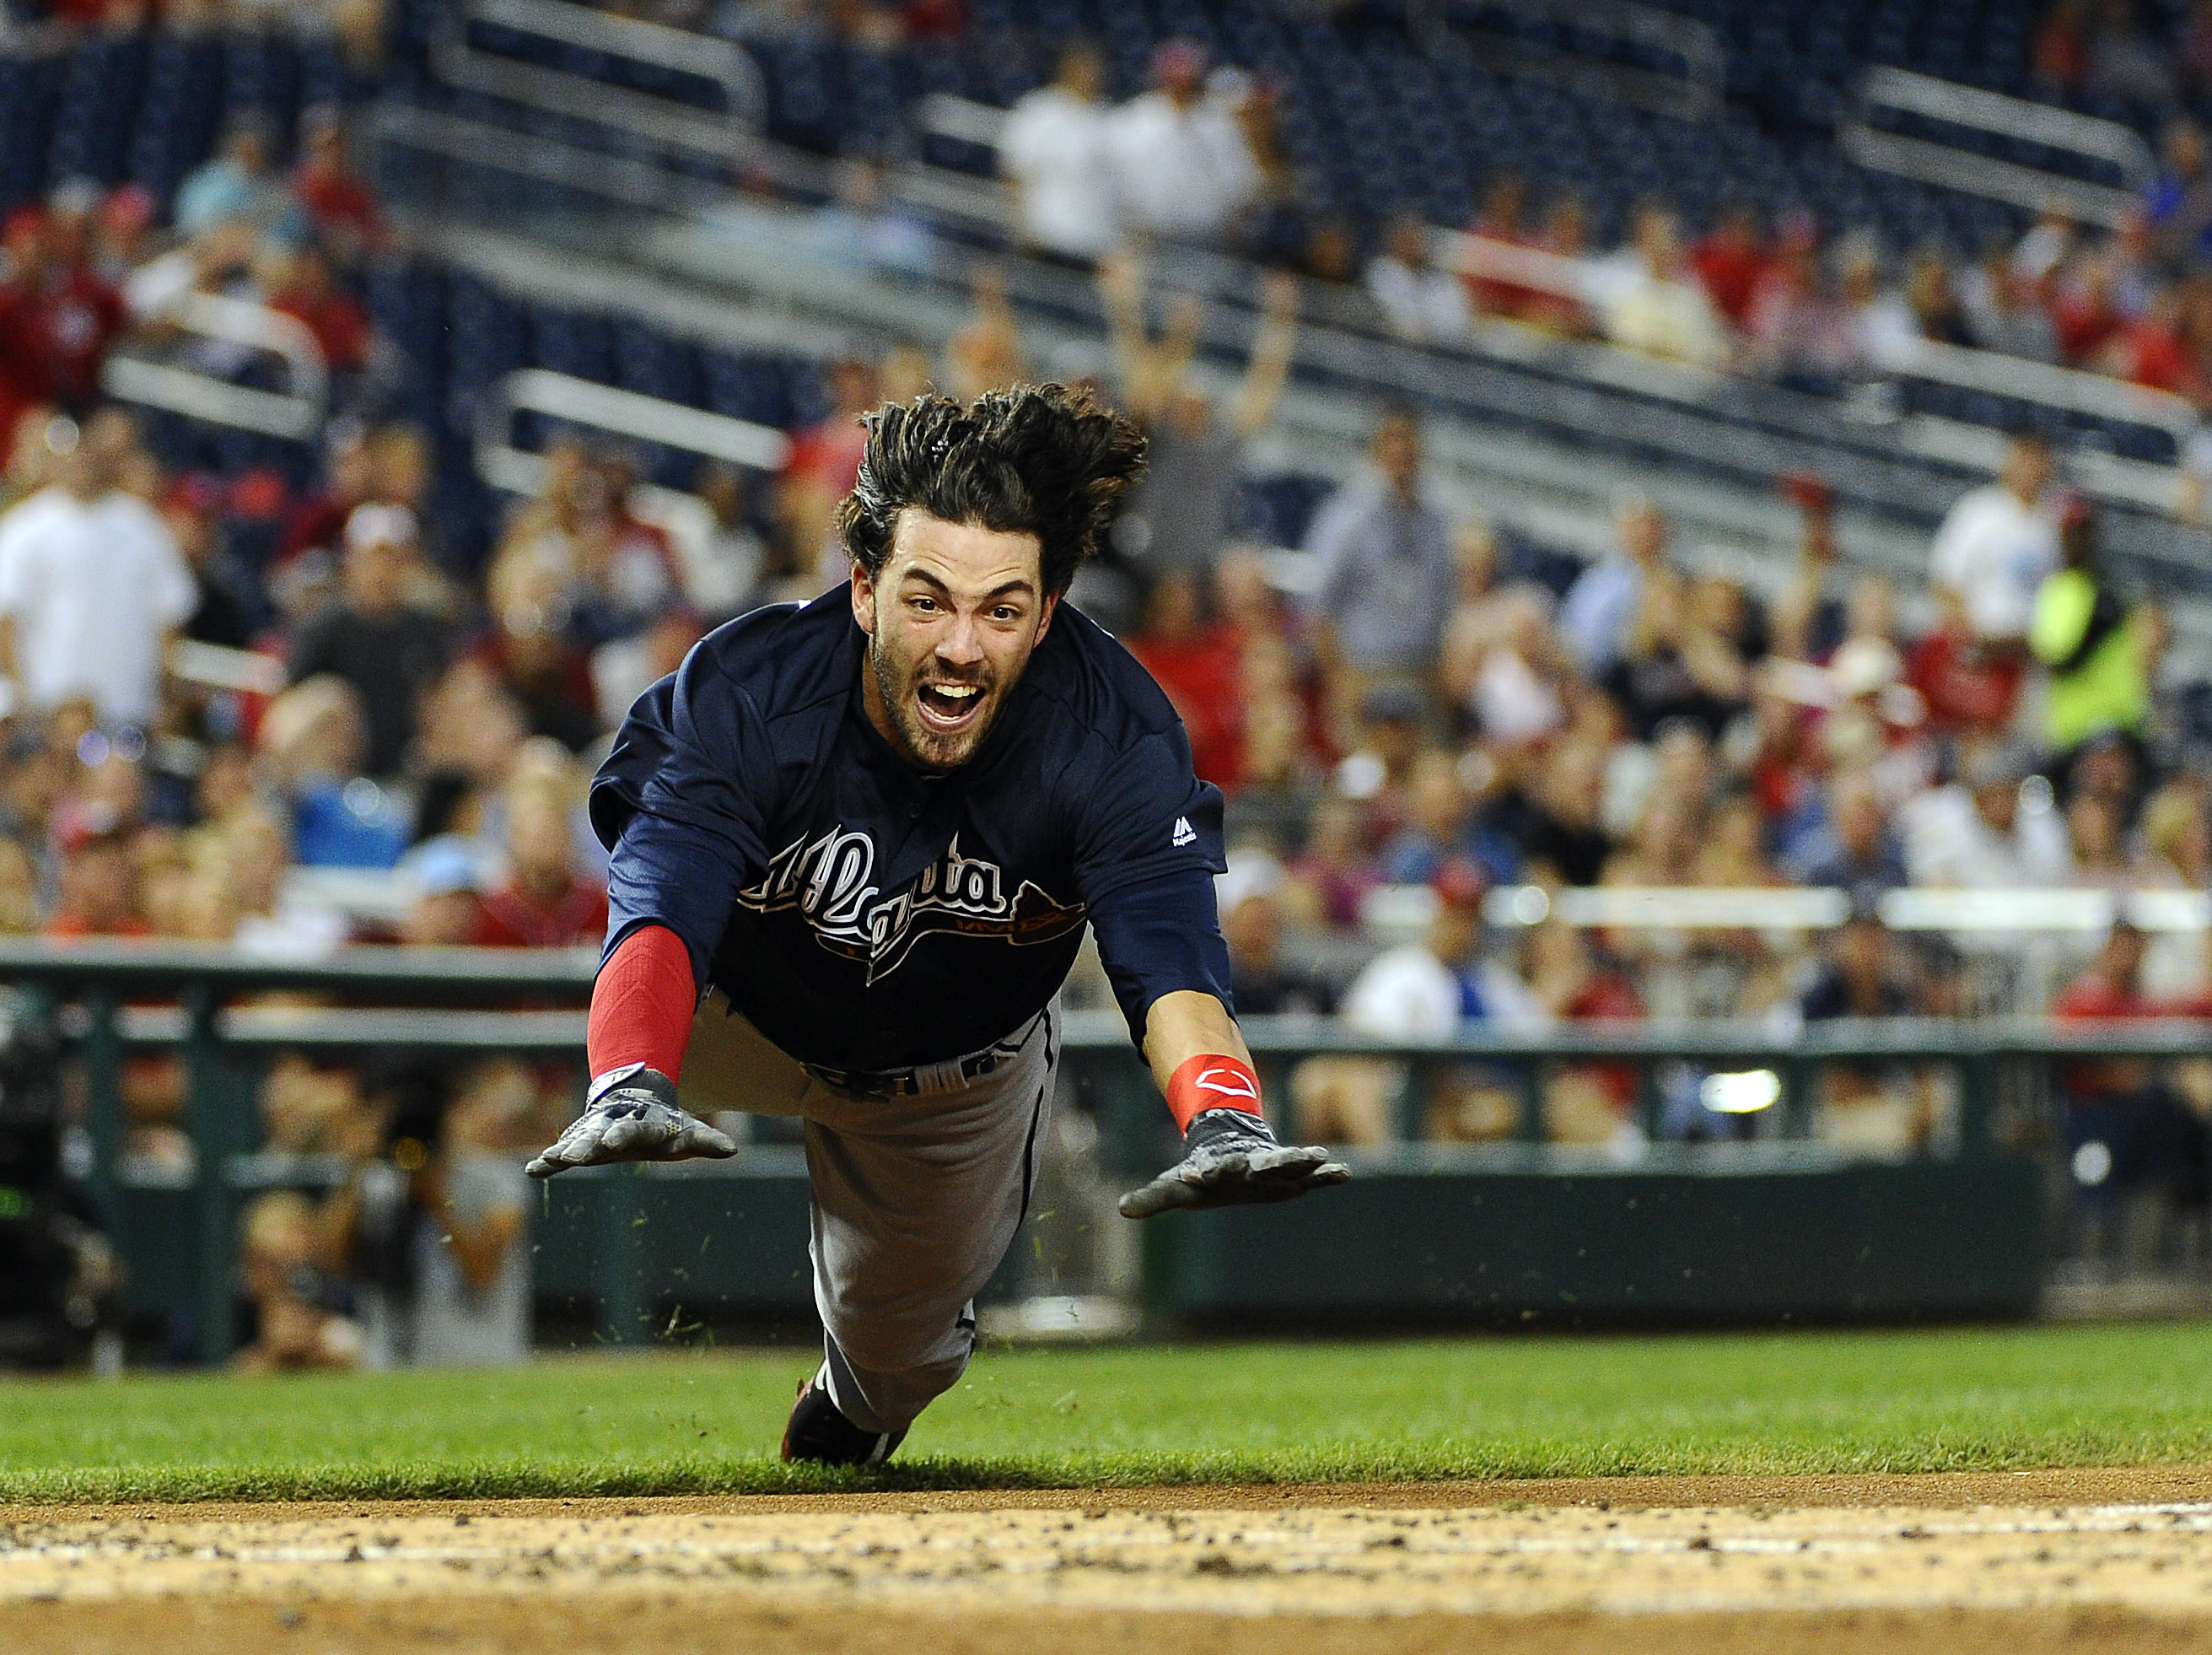 Dansby Swanson's first career home run was an electrifying inside-the-park  shot